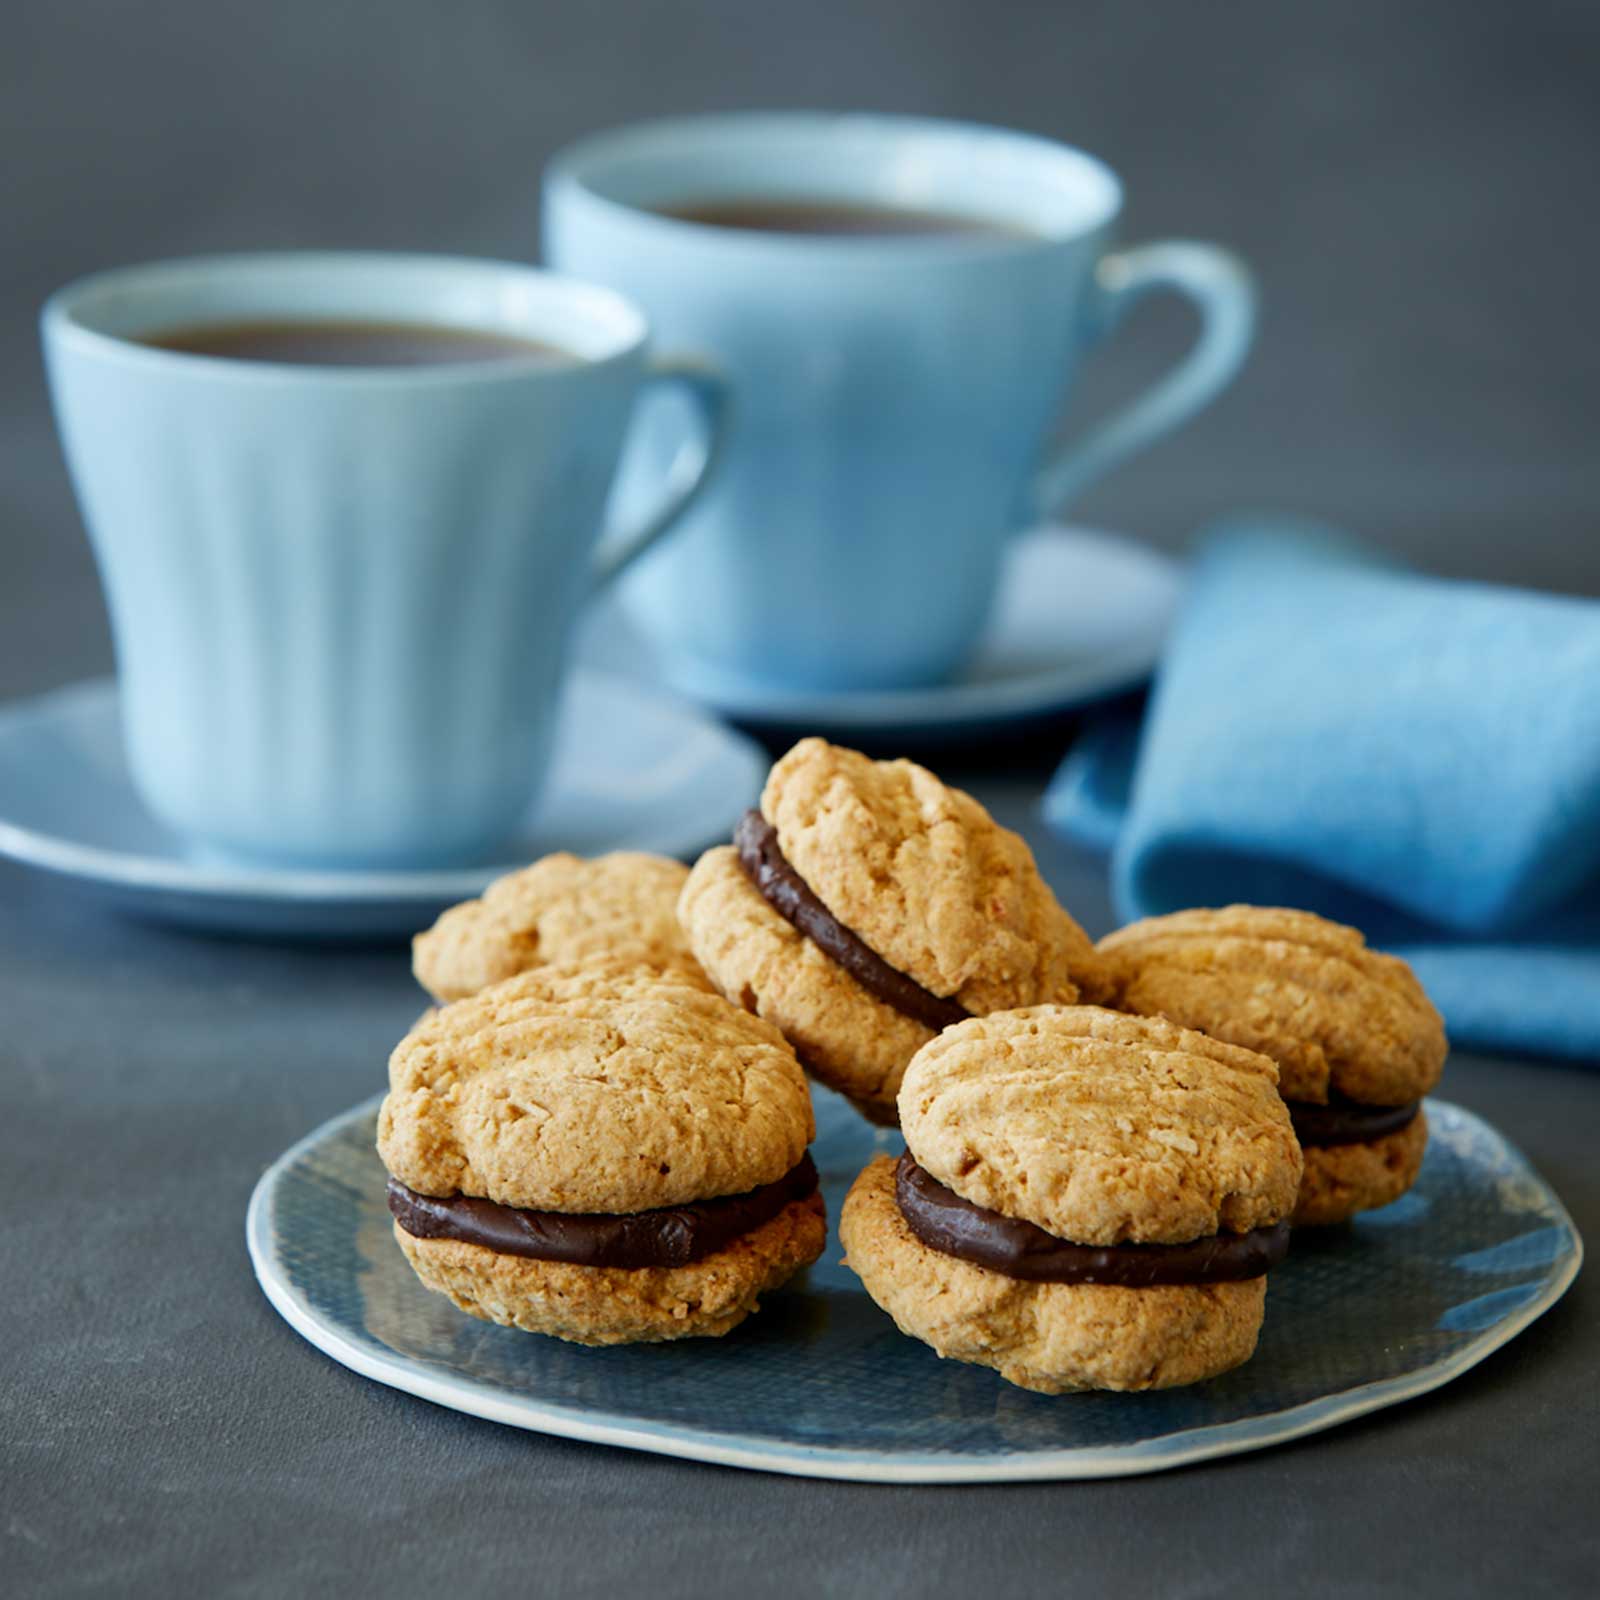 Five vegan and gluten-free kingston biscuits are arranged on a round blue plate. In the background two blue mugs sitting on saucers are filled with black tea.